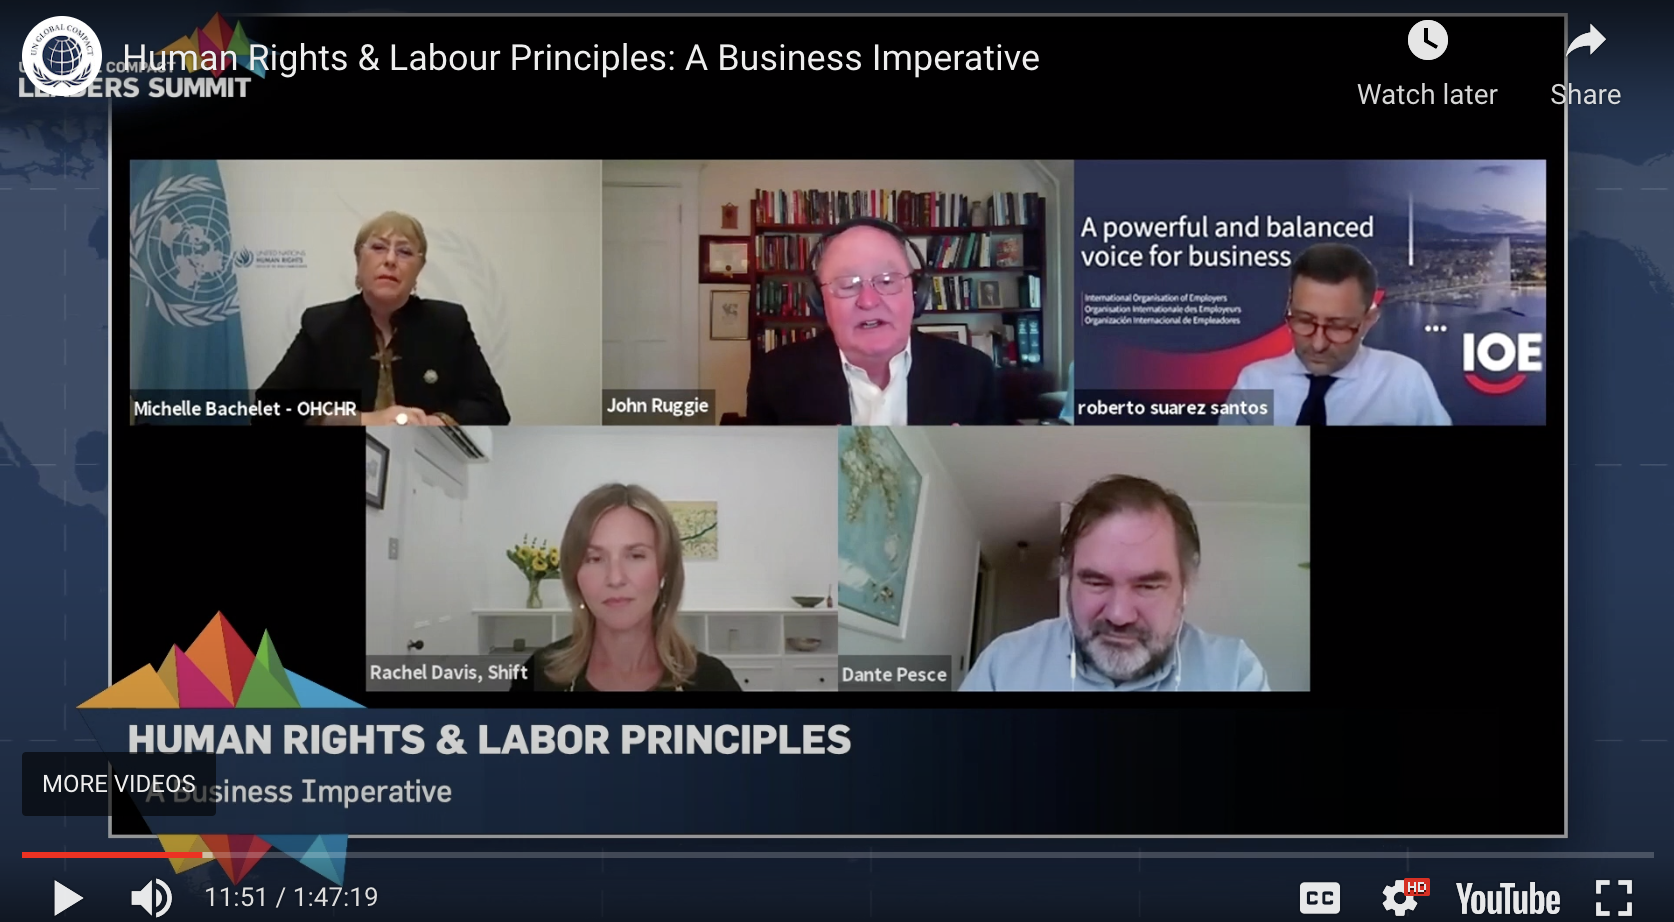 Human Rights & Labor Principles: A Business Imperative